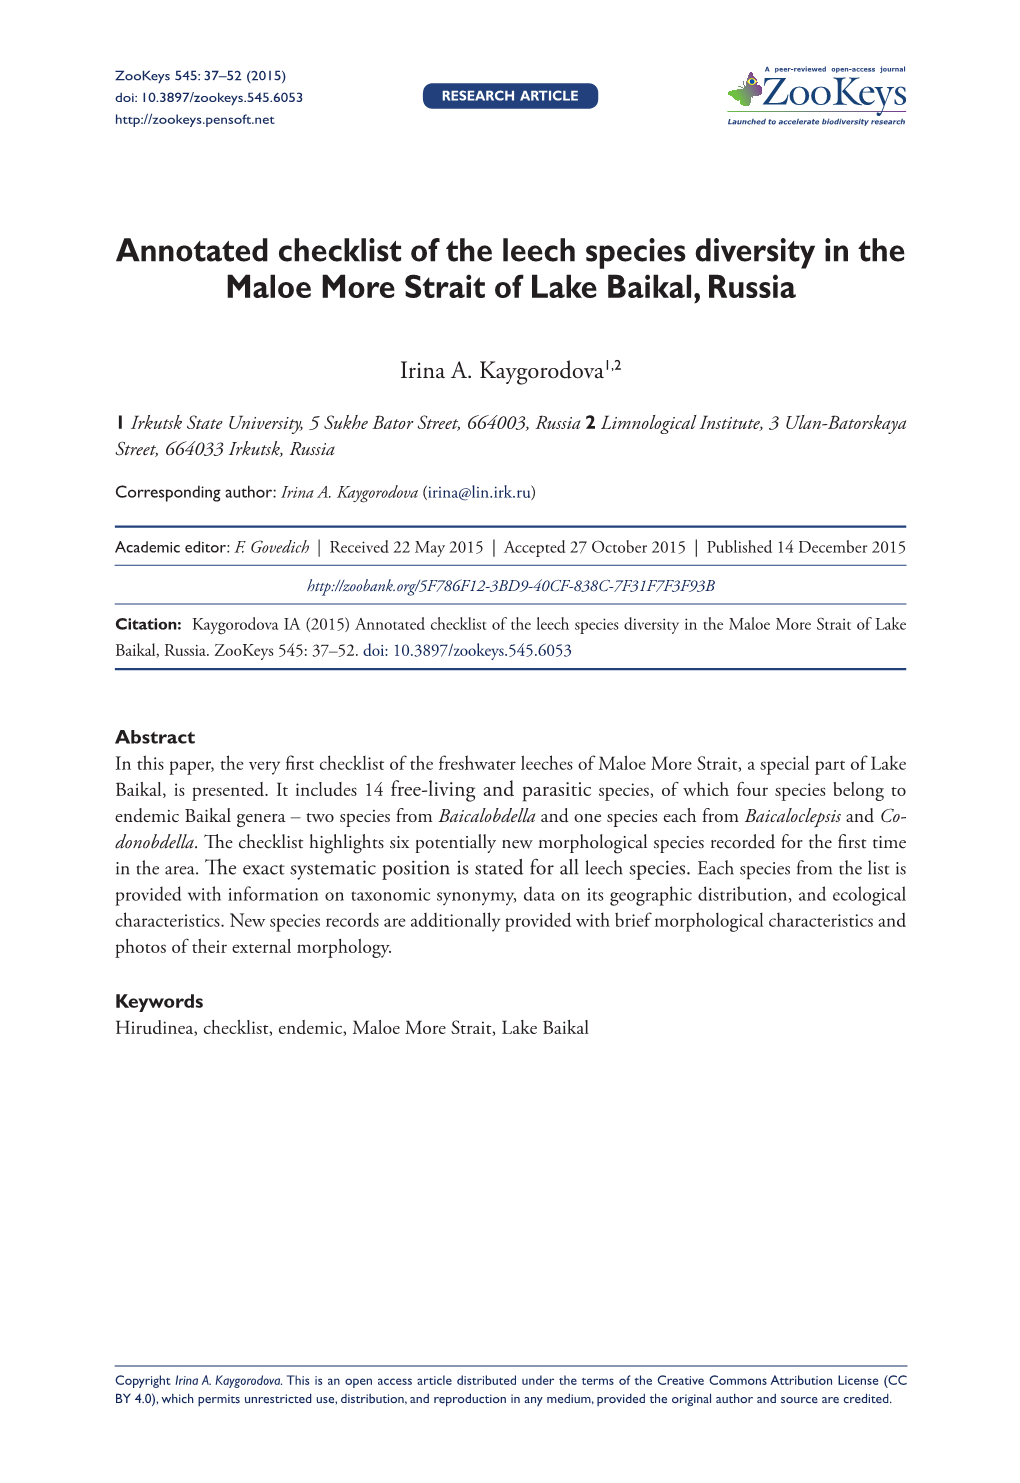 Annotated Checklist of the Leech Species Diversity in the Maloe More Strait of Lake Baikal, Russia